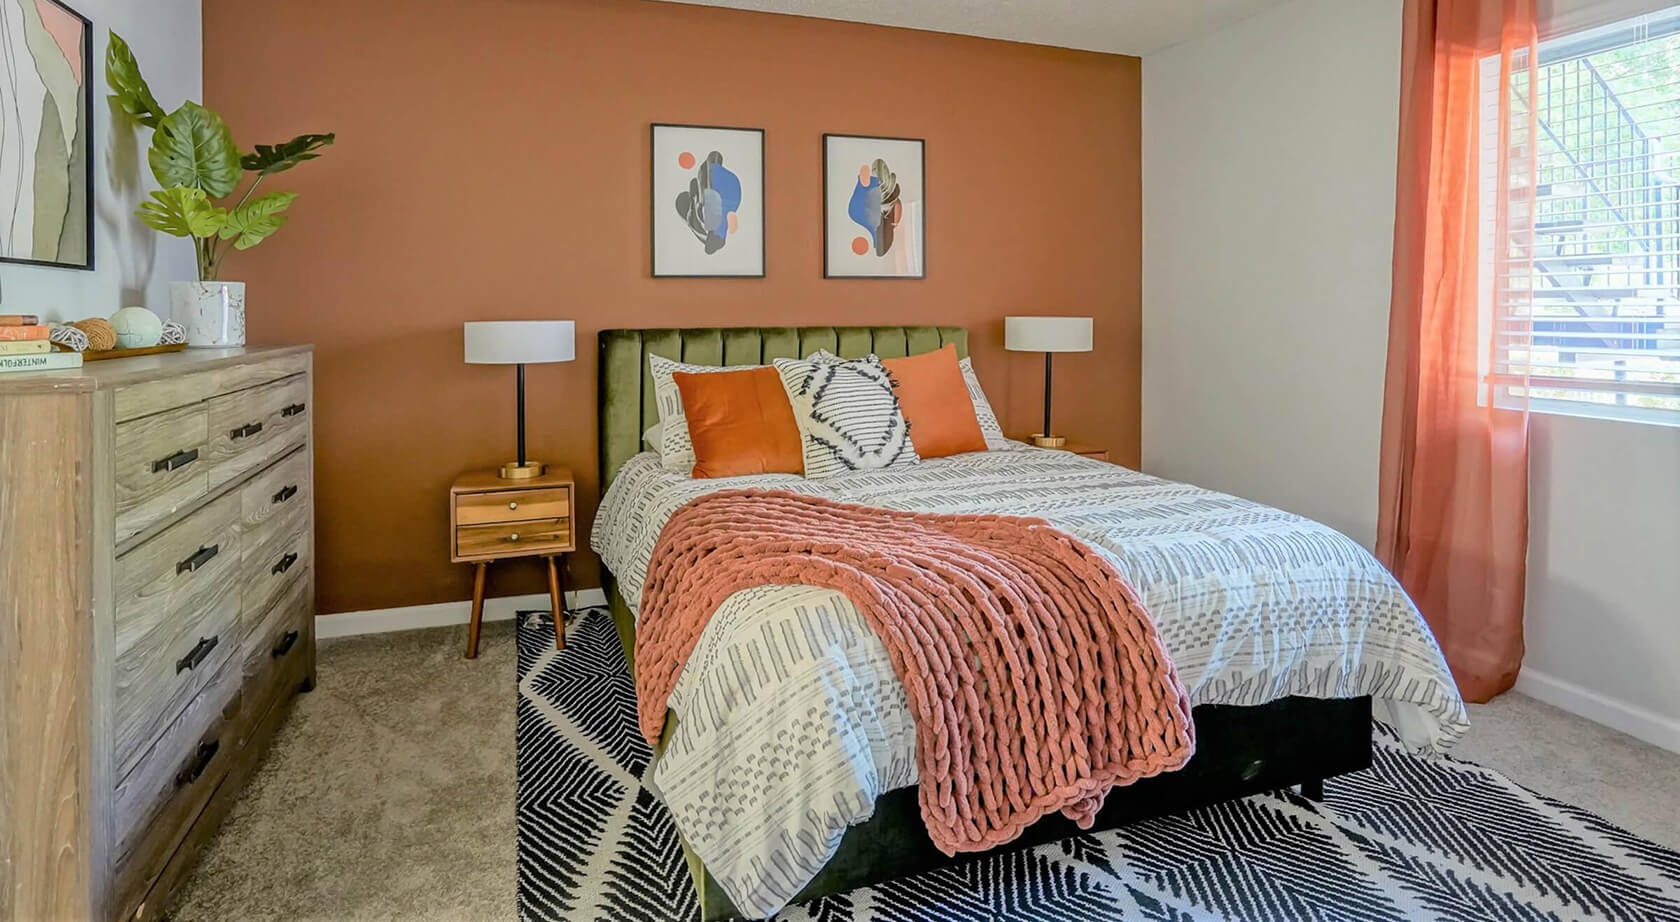 Fully furnished bedroom interior at Treehouse in Albuquerque, New Mexico